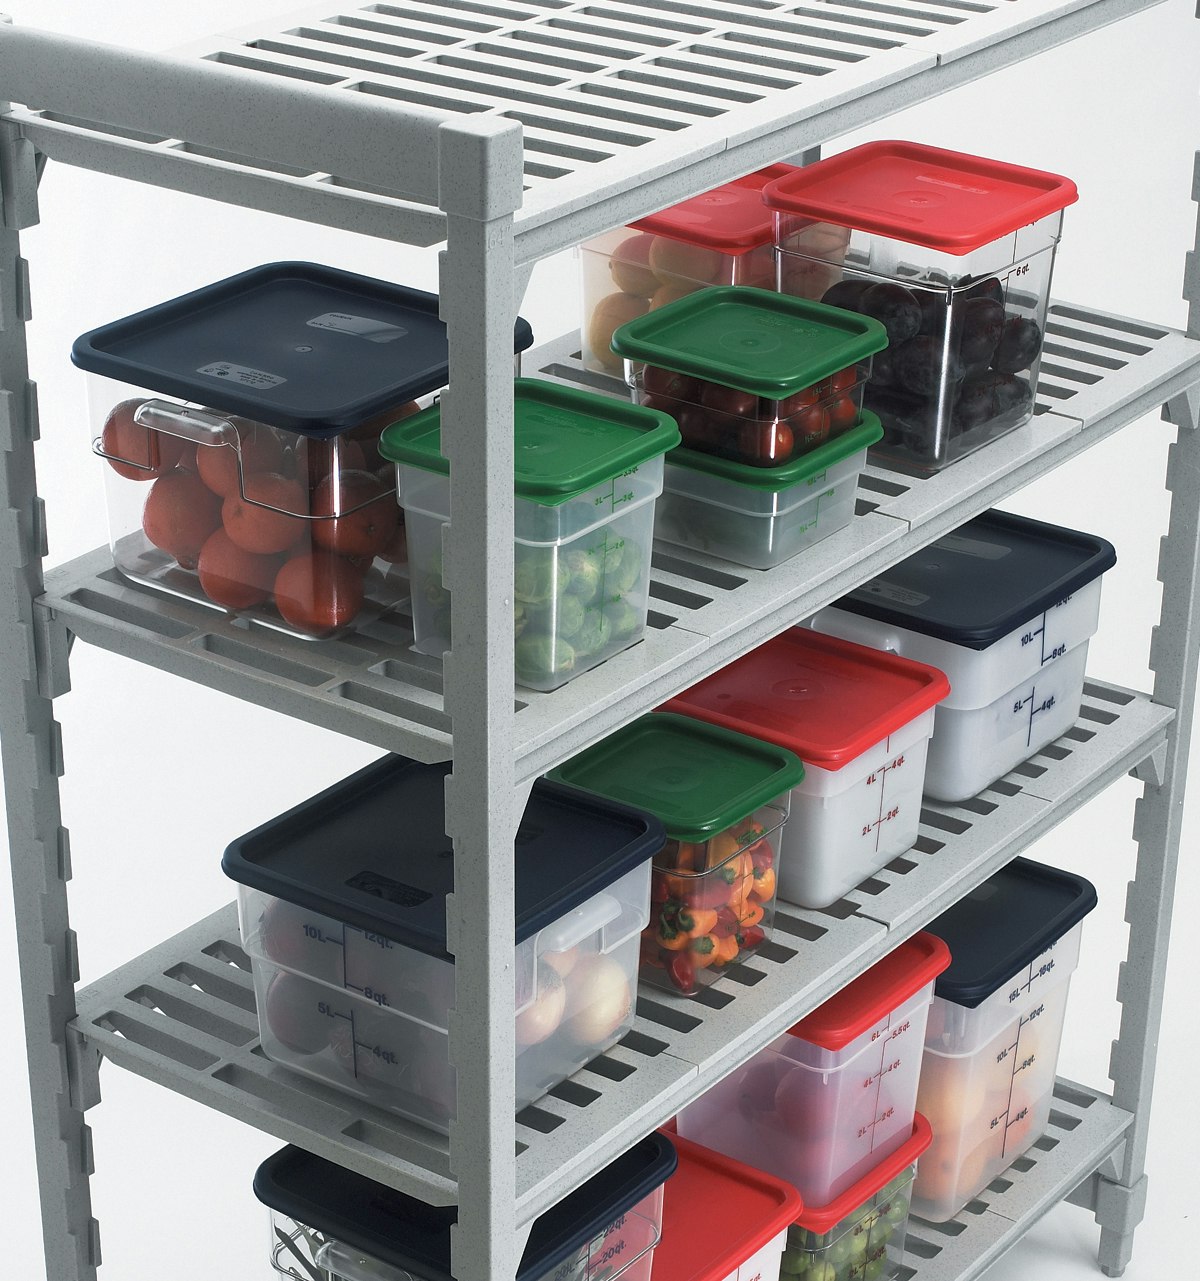 https://cambro-dam.imgix.net/PU0DO3EZ/as/pomojt-6r21jk-elp9rv/CamSquares_with_Color_Lids_on_Camshelving.jpg?dl